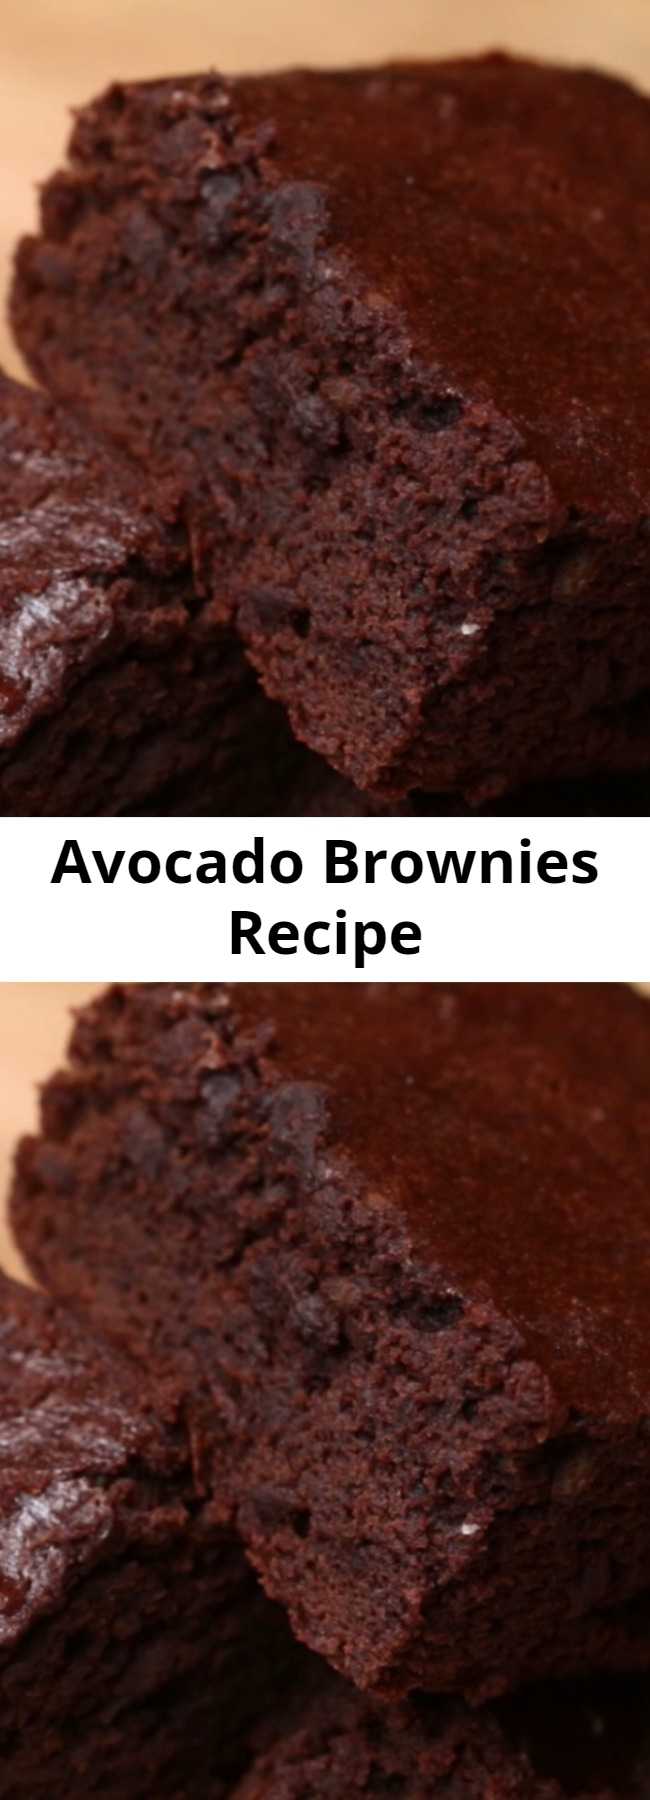 Avocado Brownies Recipe - They're pretty decent healthy brownies! They've got a good fudgy texture and most people thought the taste was pretty good too. Apparently you can swap butter with avocado and still get delicious, healthier brownies!